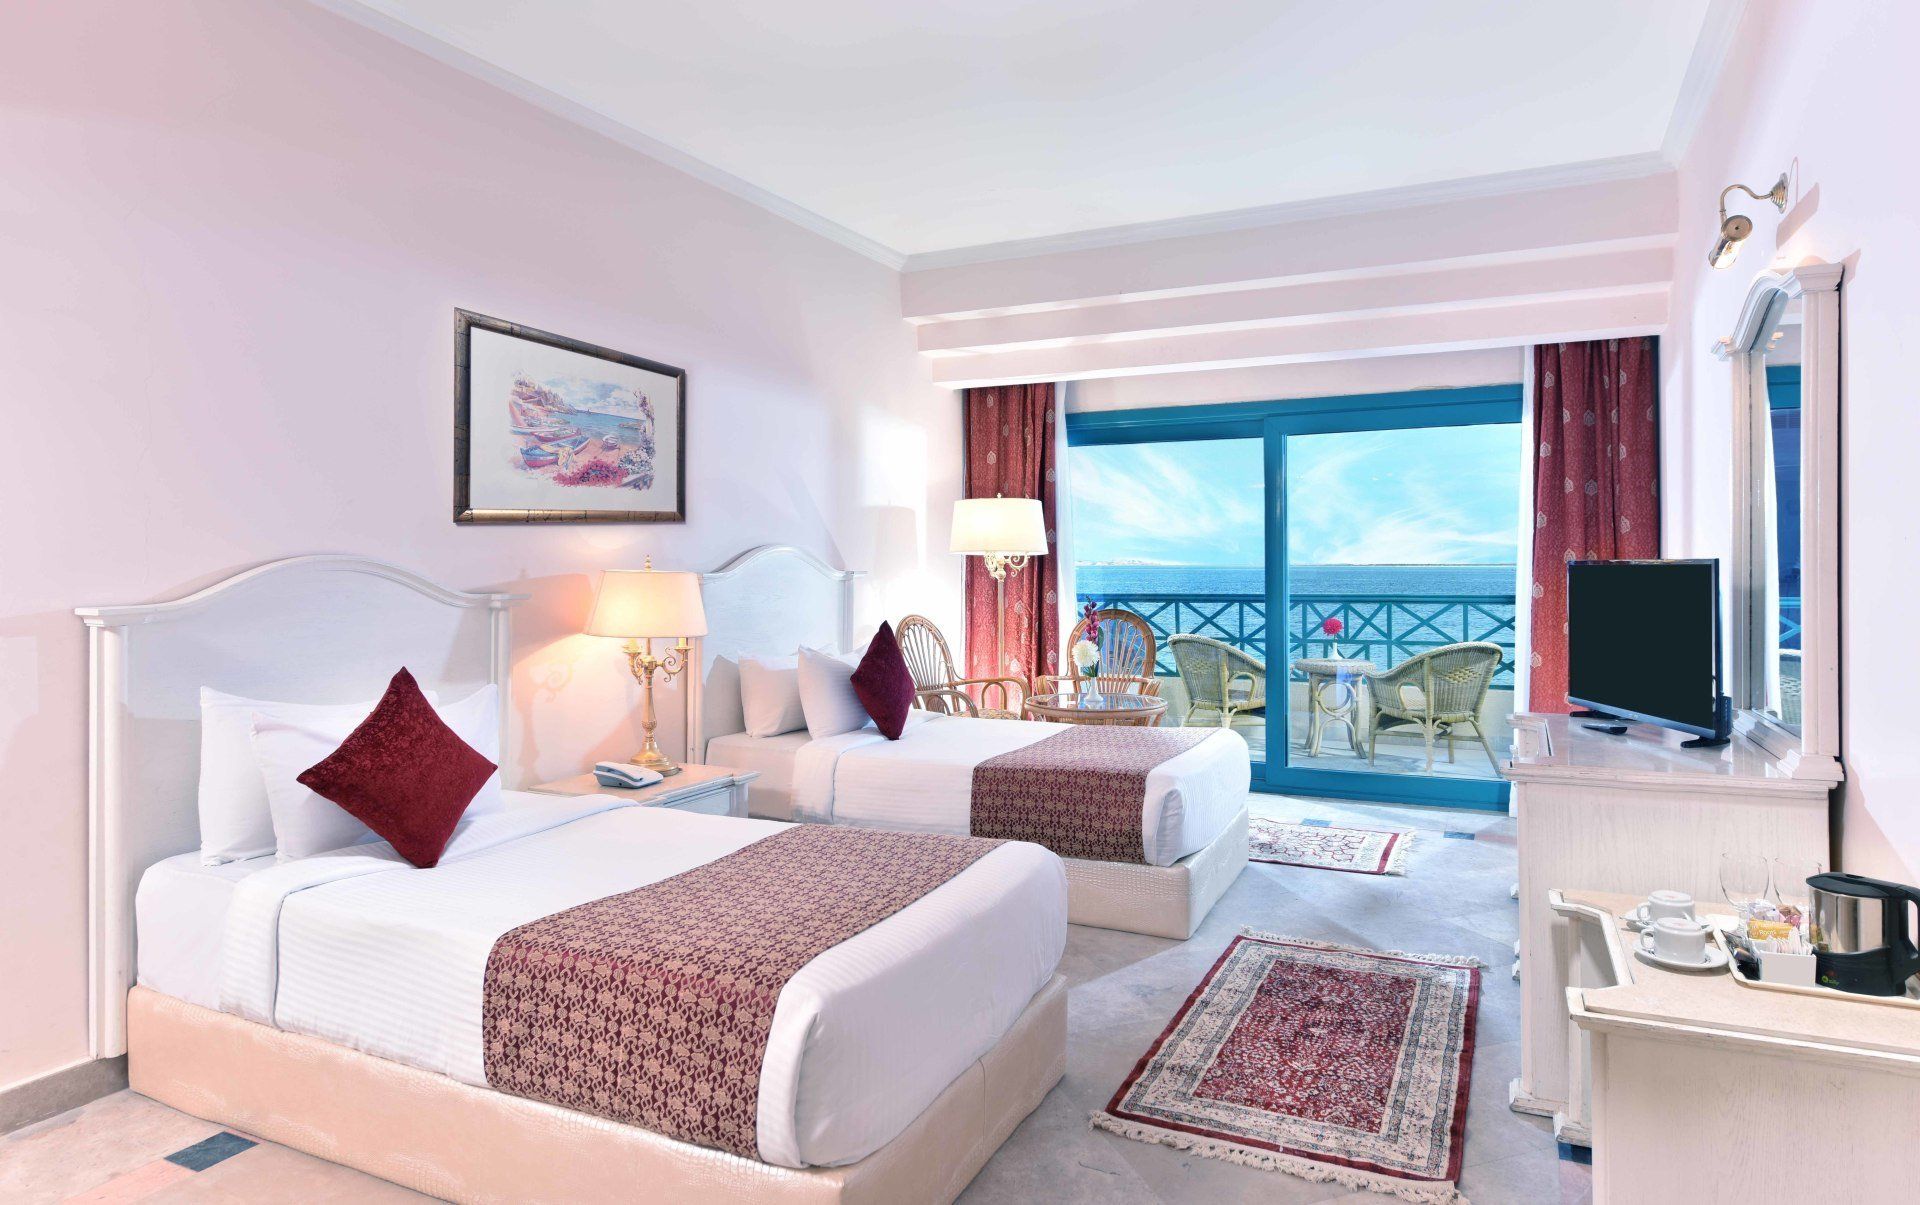 Hotelux Marina Beach Resort is one of the best Hurghada hotels boasts of spacious rooms with sea view